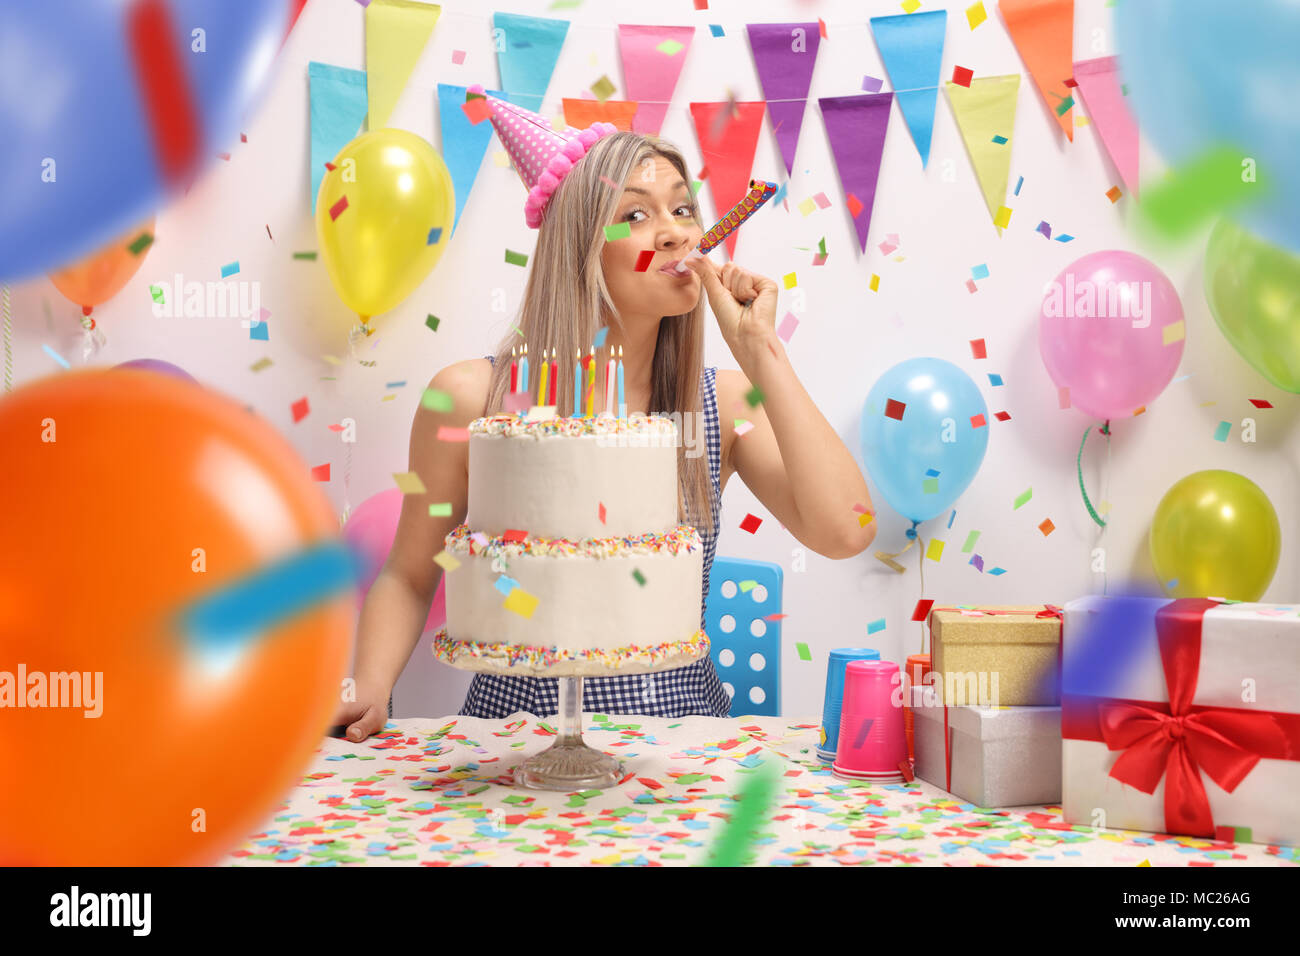 Young woman with a birthday cake blowing a party horn against a wall with balloons and decoration flags Stock Photo